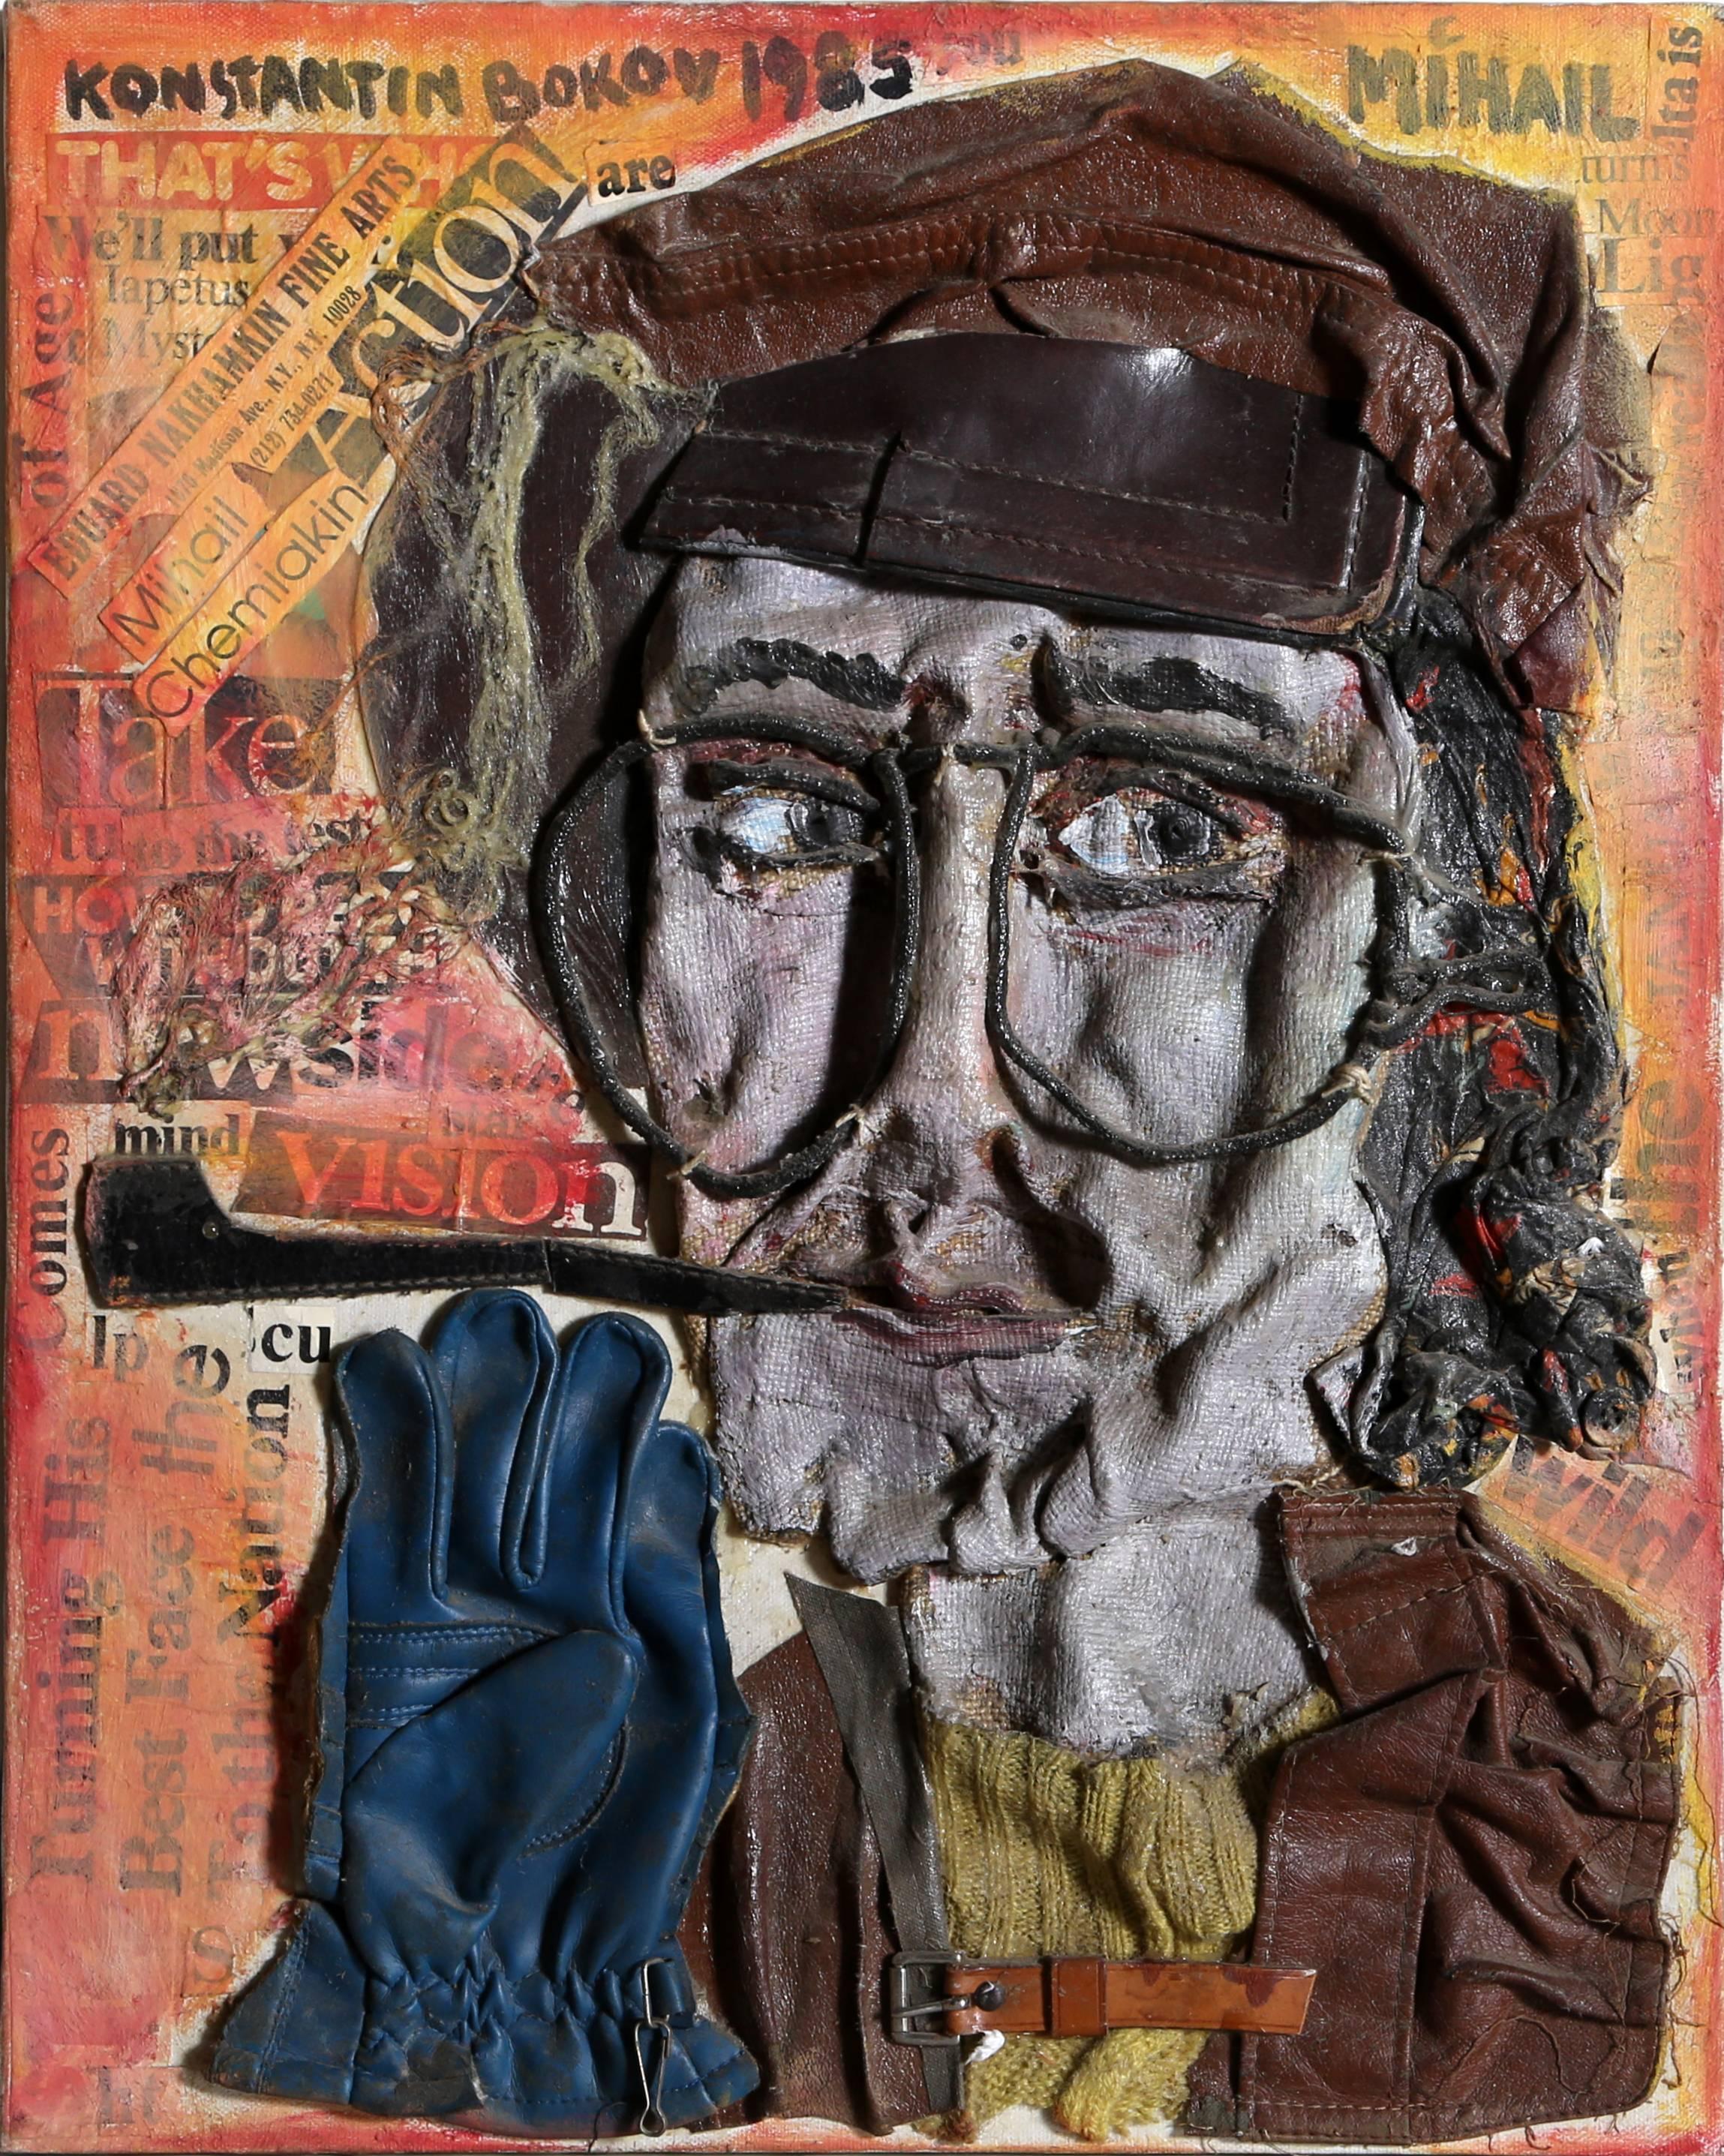 Mihail (Chemiakin), Found Art Collage and Painting by Bokov - Mixed Media Art by Konstantin Bokov